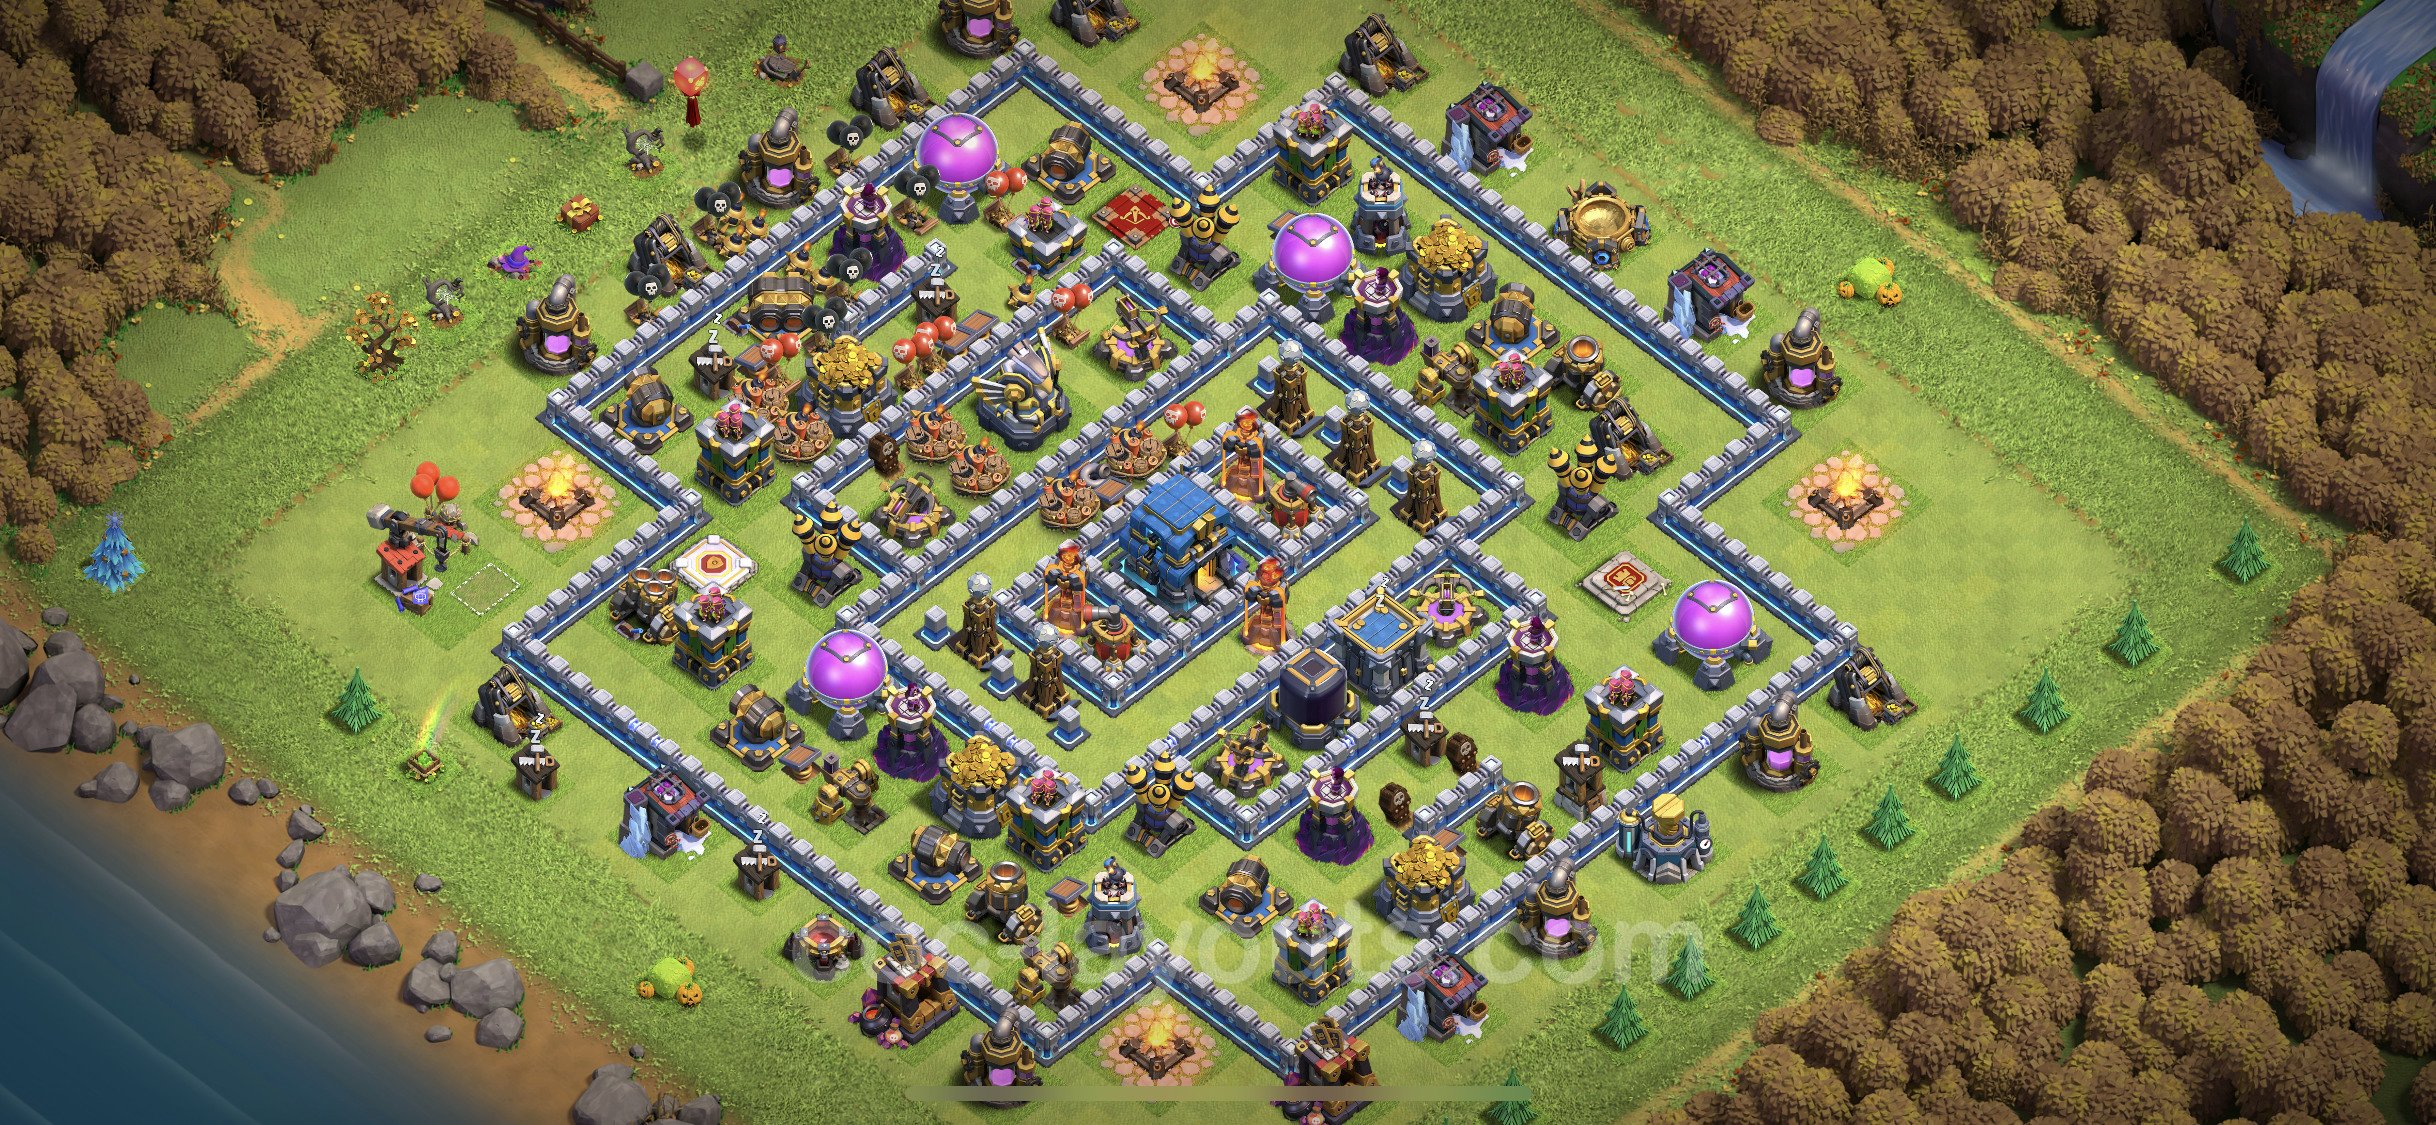 Farming Base TH12 Max Levels with Link, Hybrid, Anti 3 Stars - Town Hall Le...